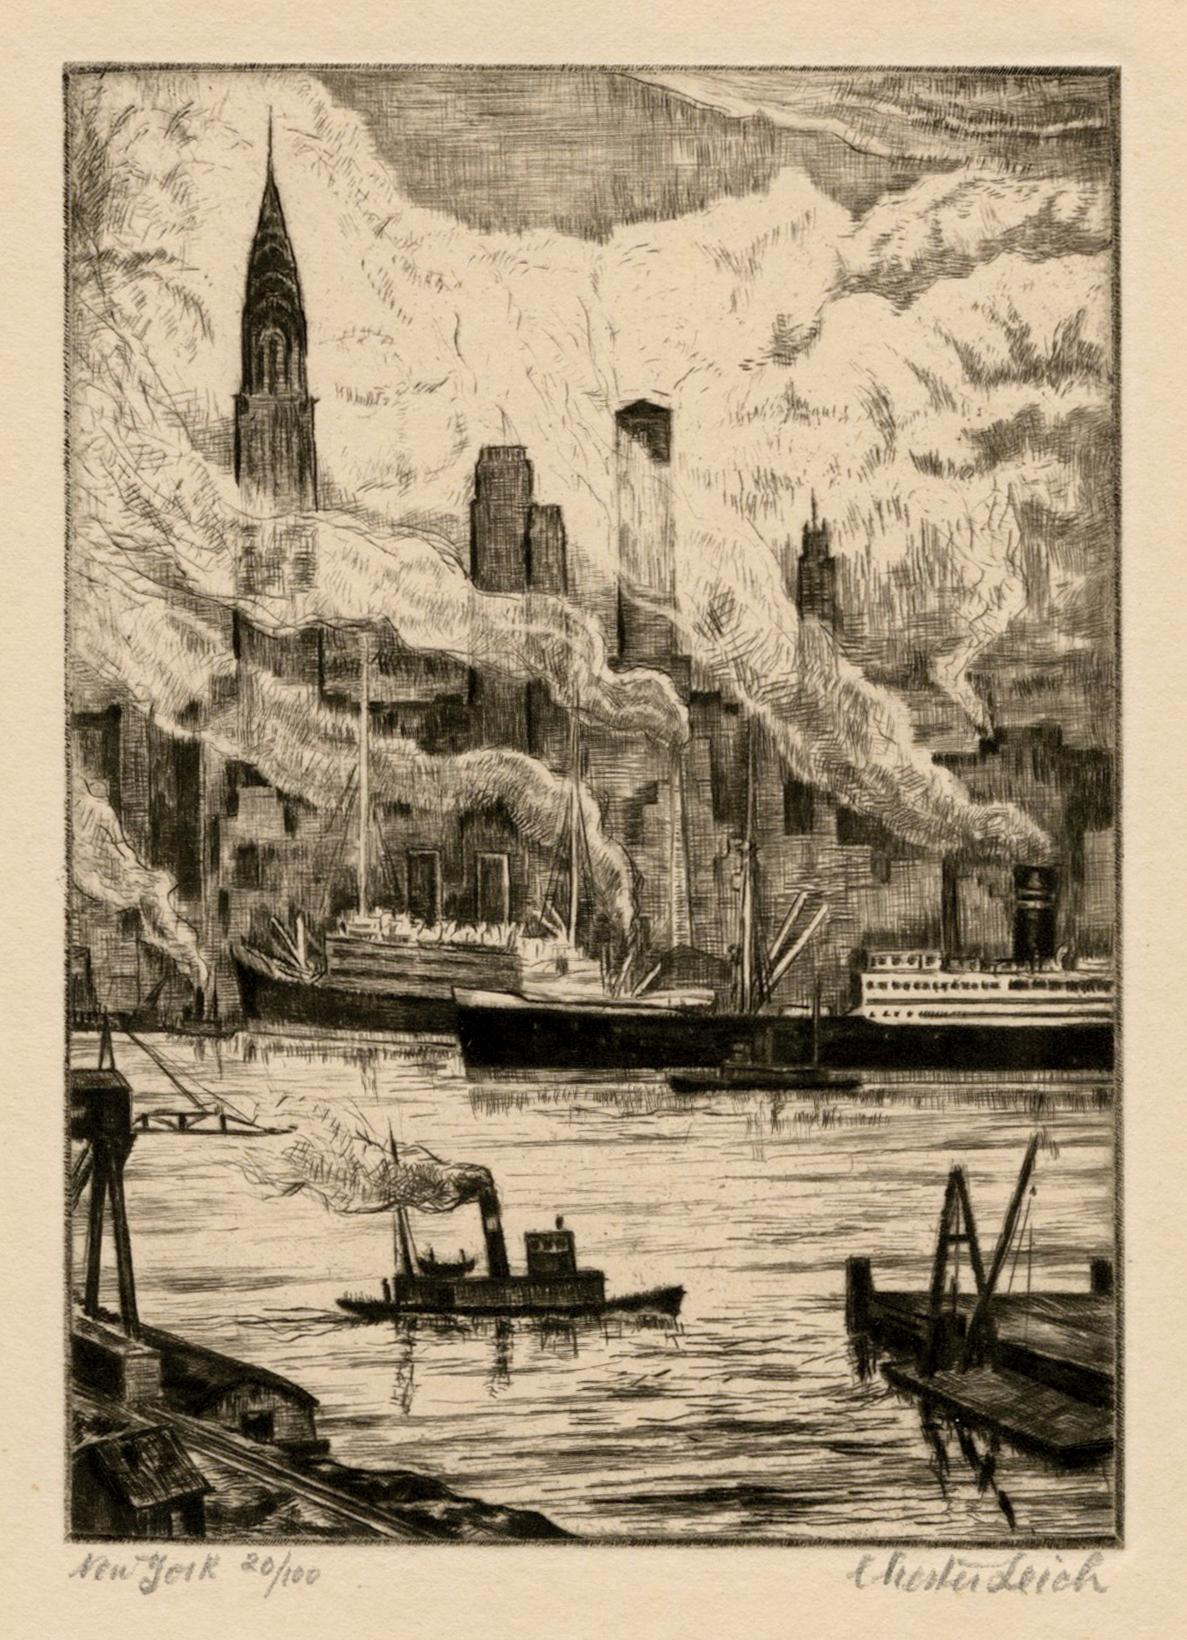 Chester Leich Figurative Print - 'New York' — 1930s American Scene Etching